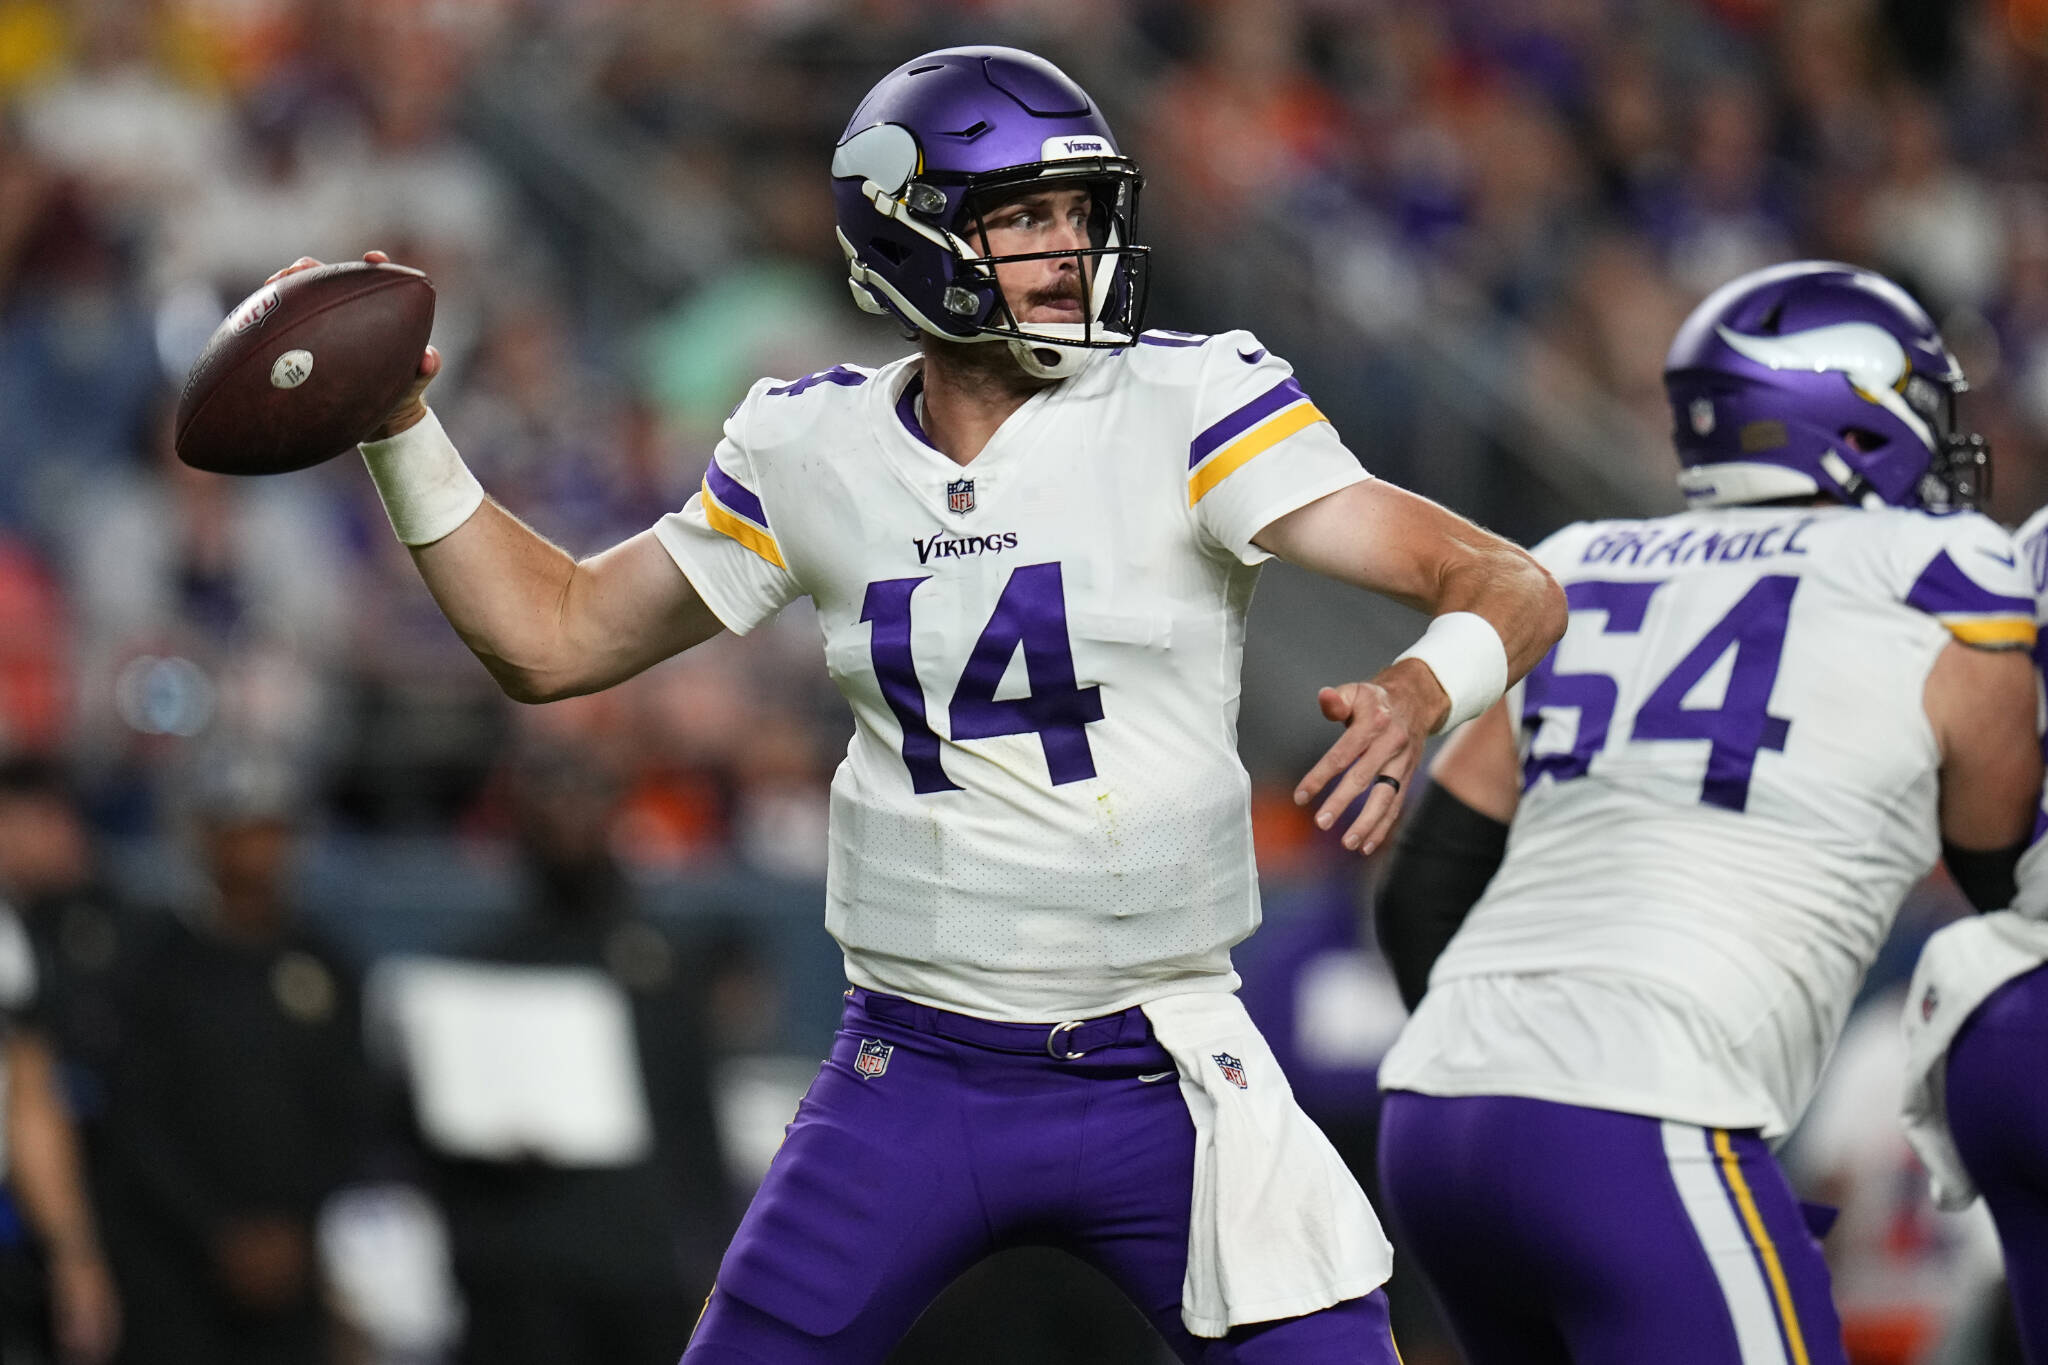 Vikings quarterback Sean Mannion throws against the Broncos during the first half of a preseason game on Aug. 27 in Denver. (AP Photo/Jack Dempsey)